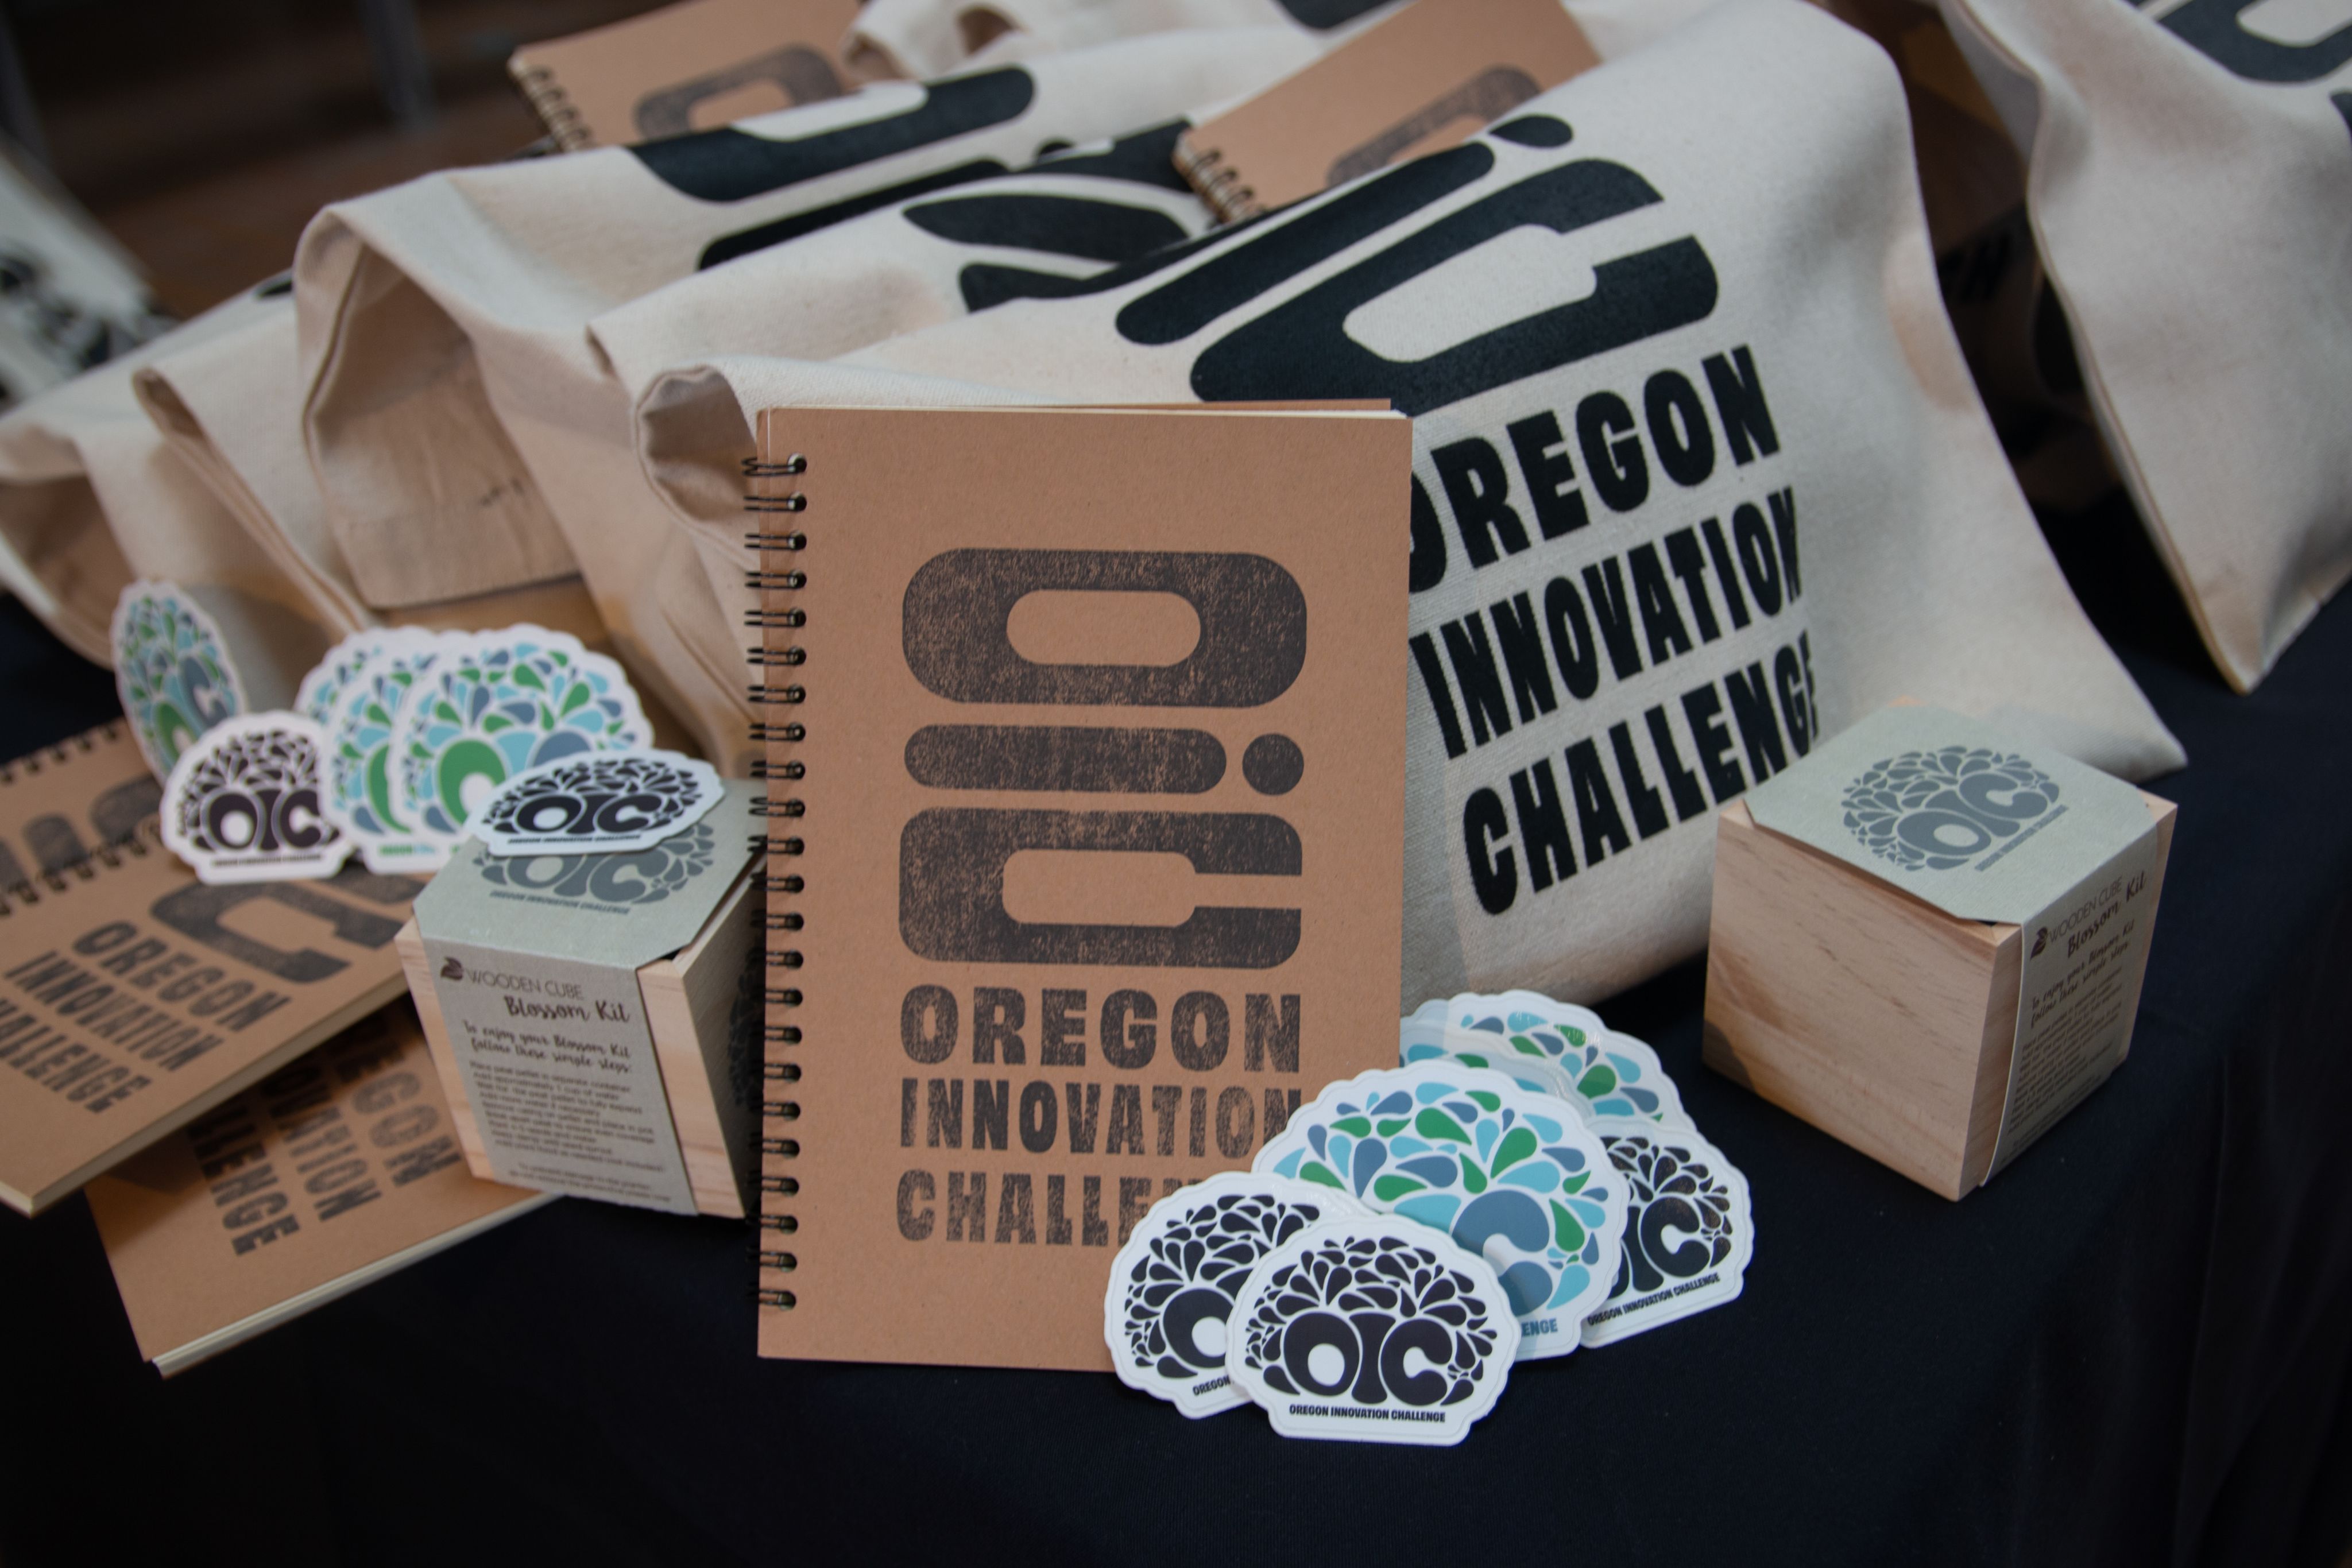 A photo of several Oregon Innovation Challenge promotional items including a notebook, stickers, and reusable bags.